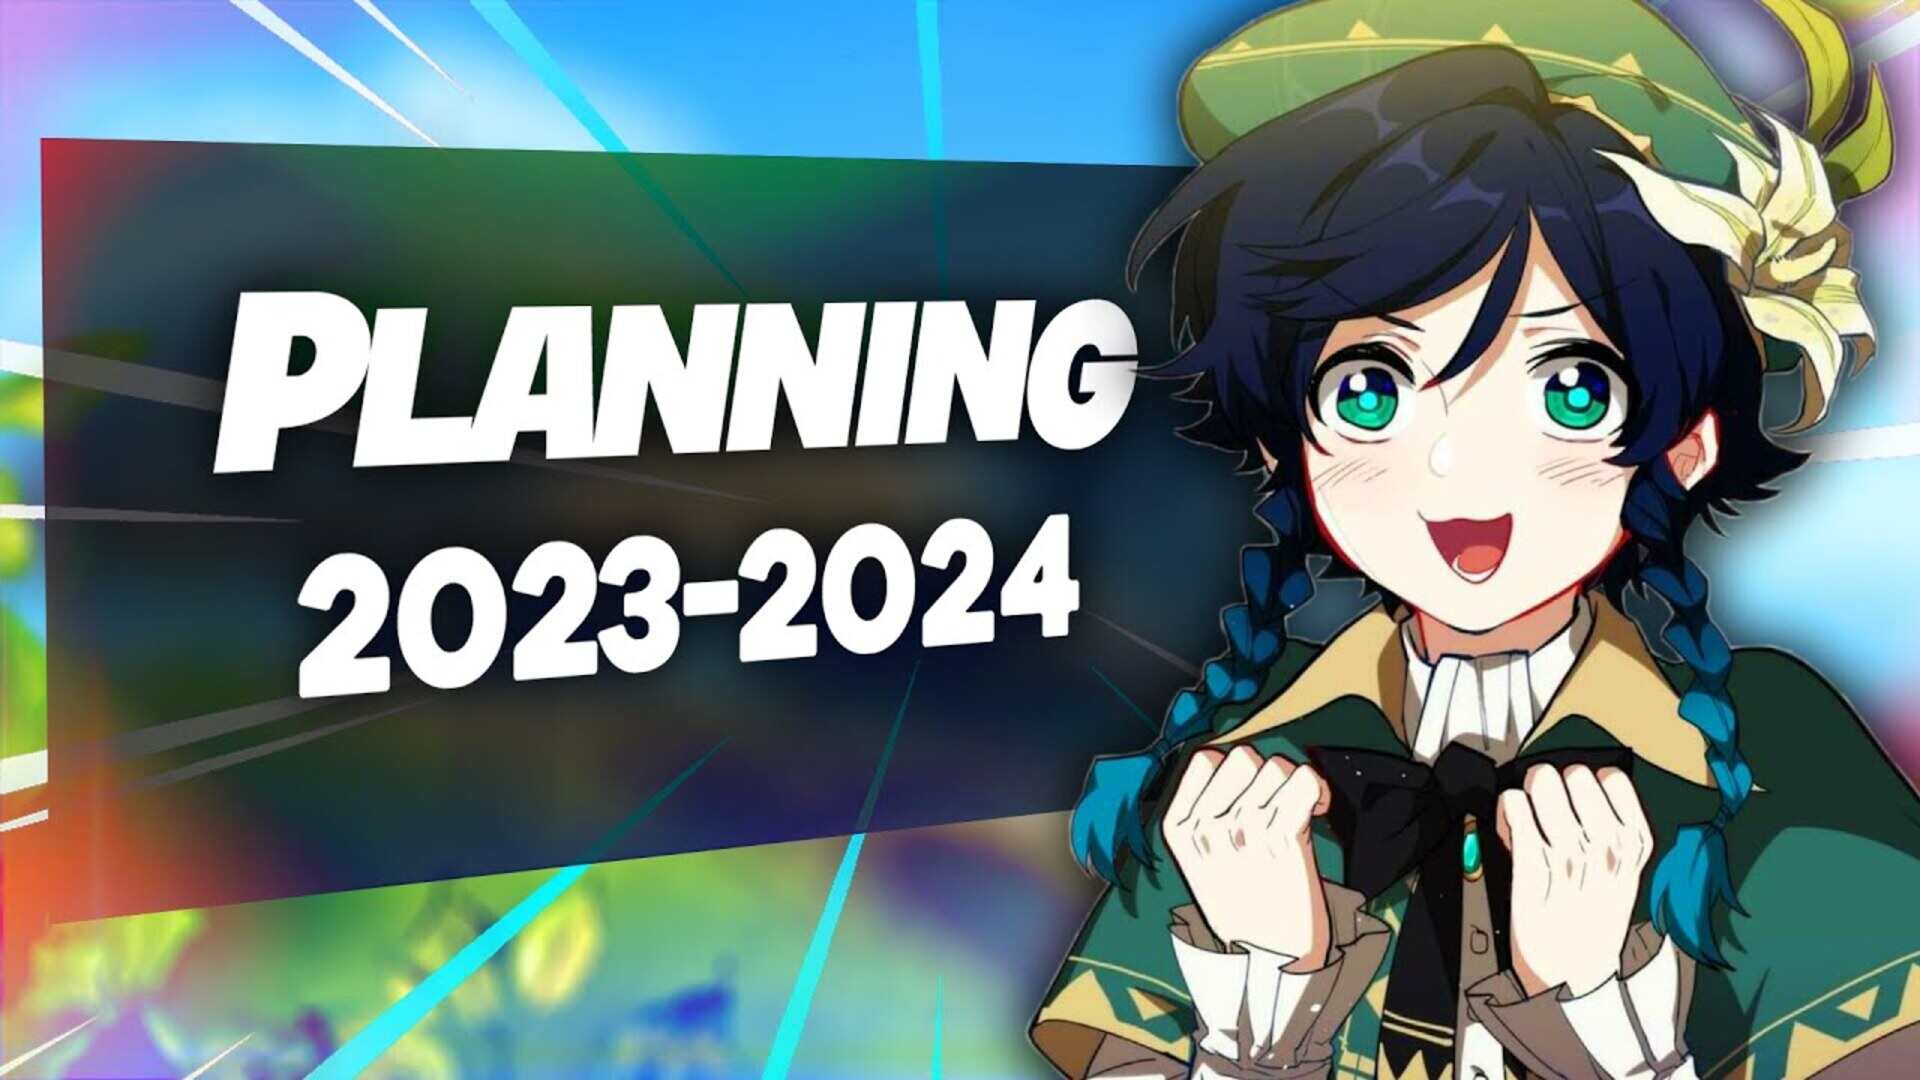 Genshin Impact 20232024 Banner Schedule New Characters, Leaks, and